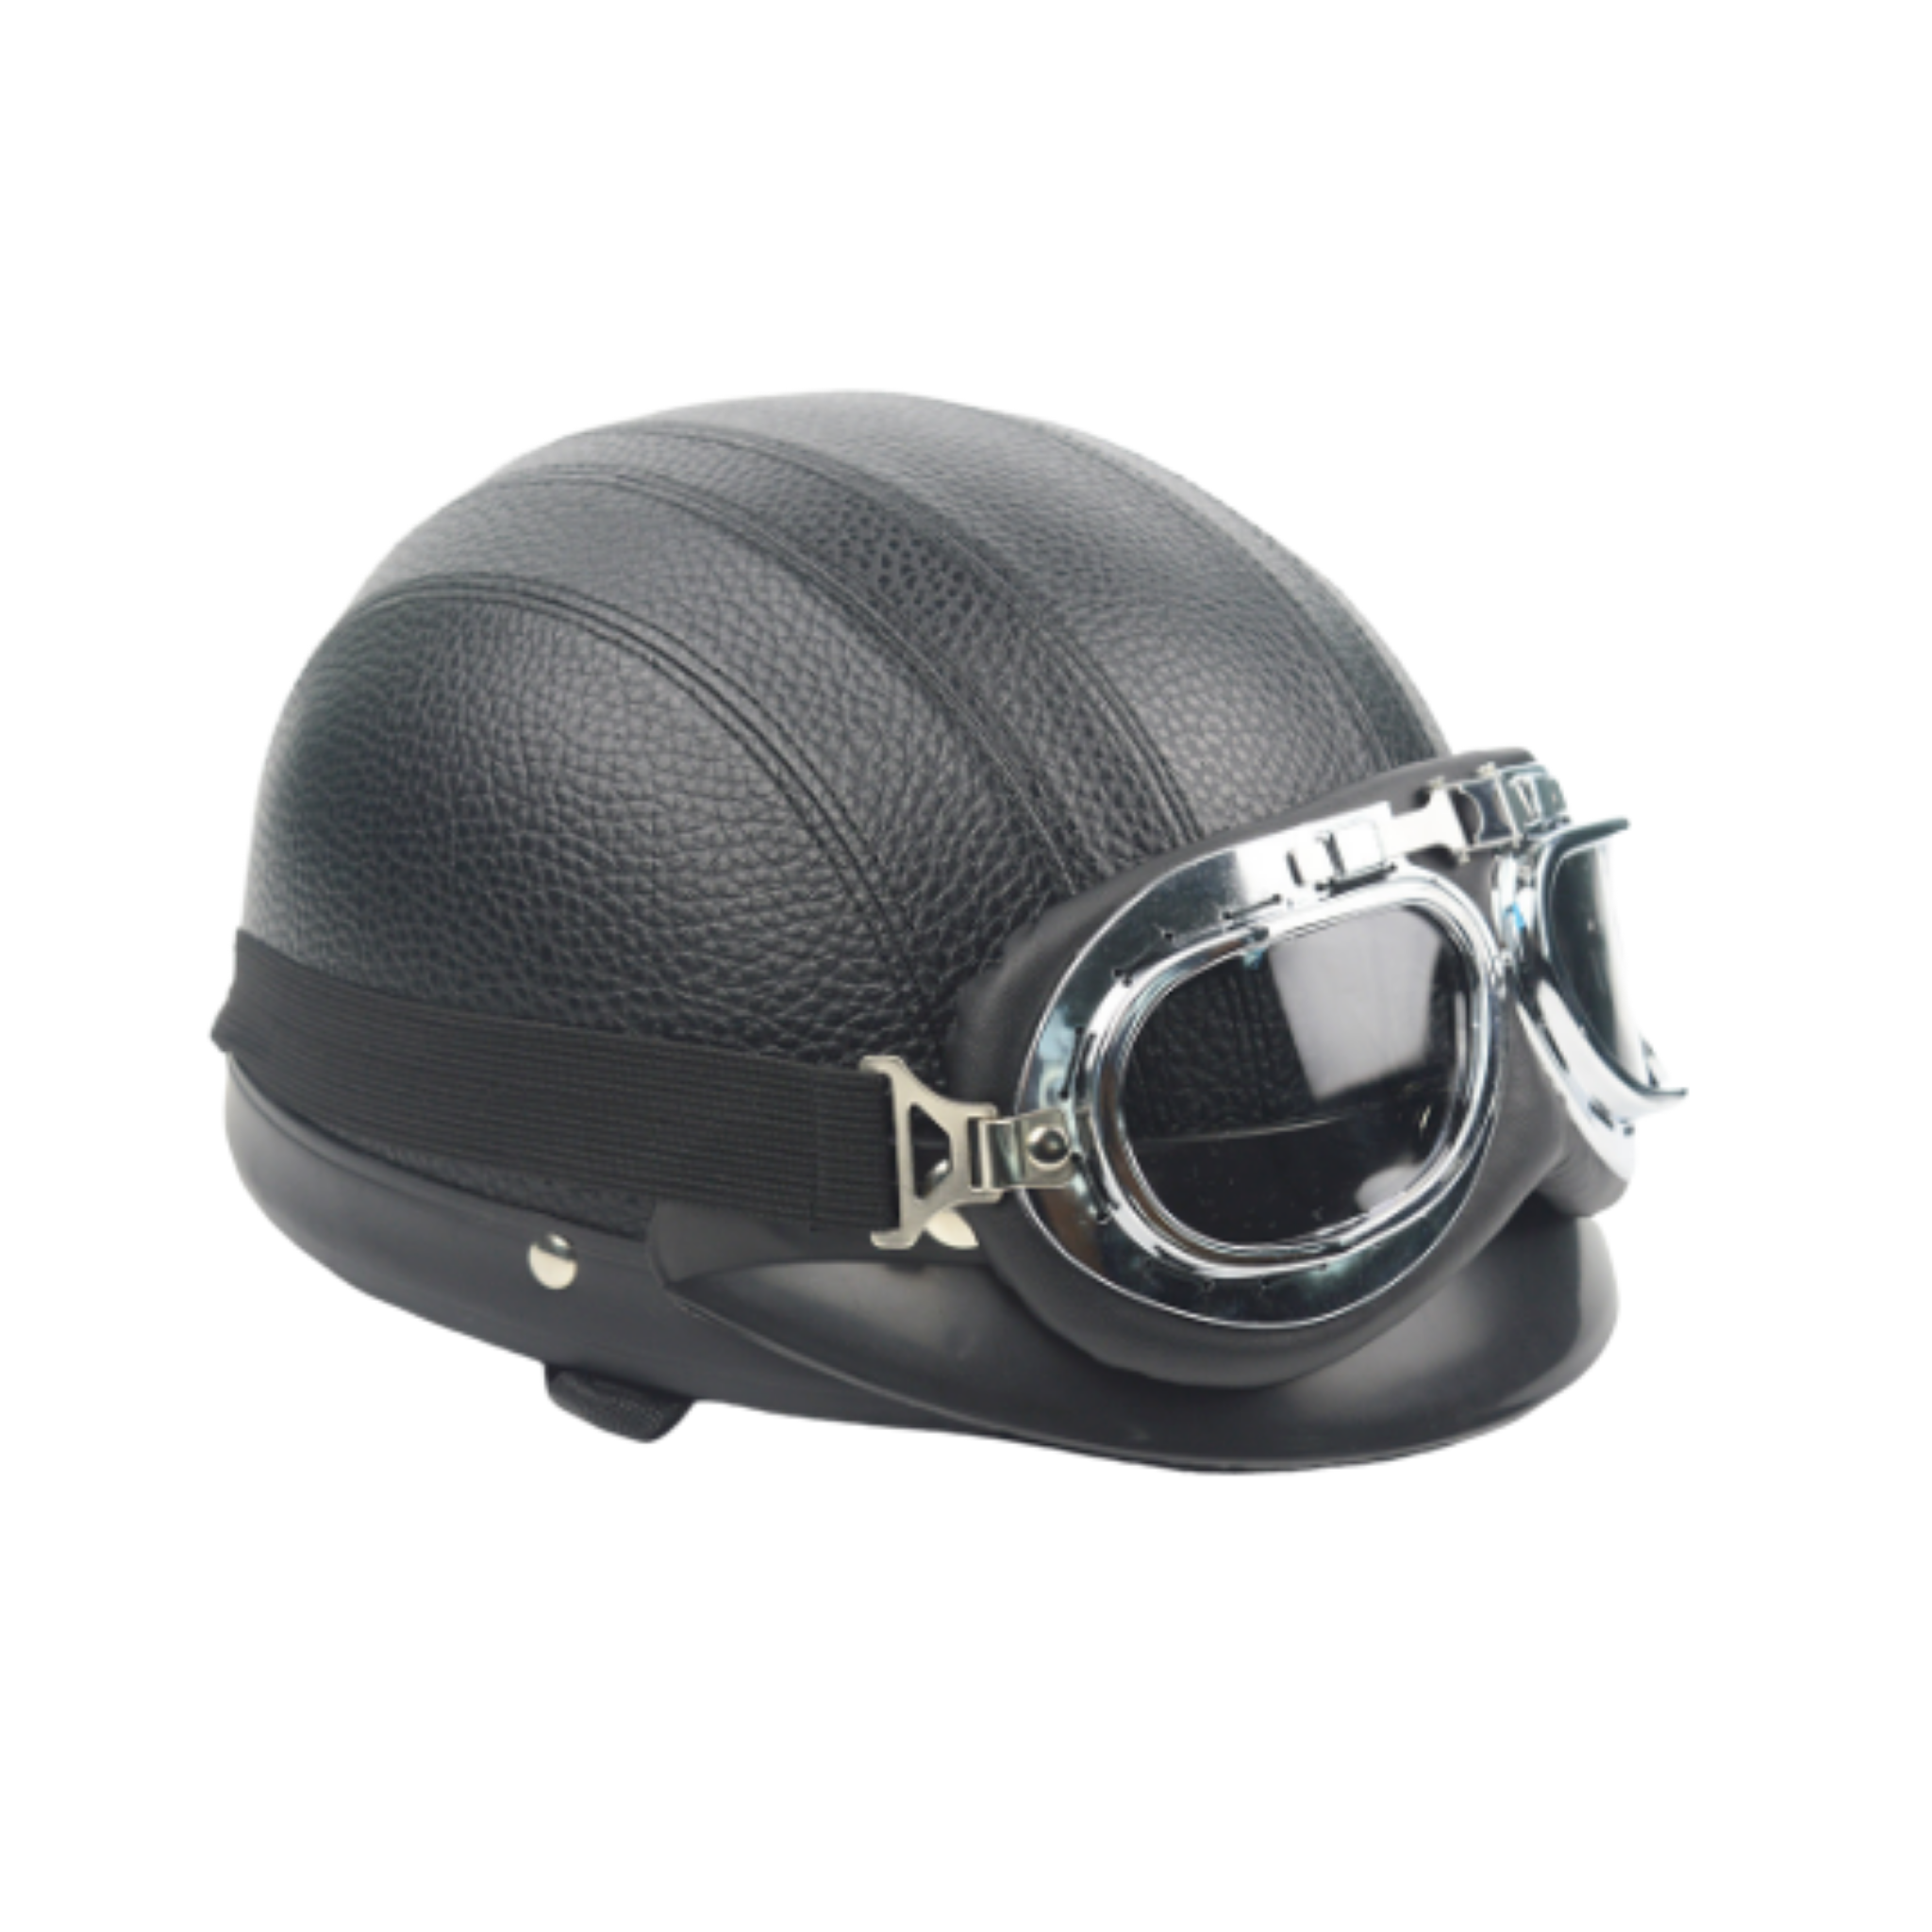 motorcycle helmet cafe racer style showing detachable visor and goggles